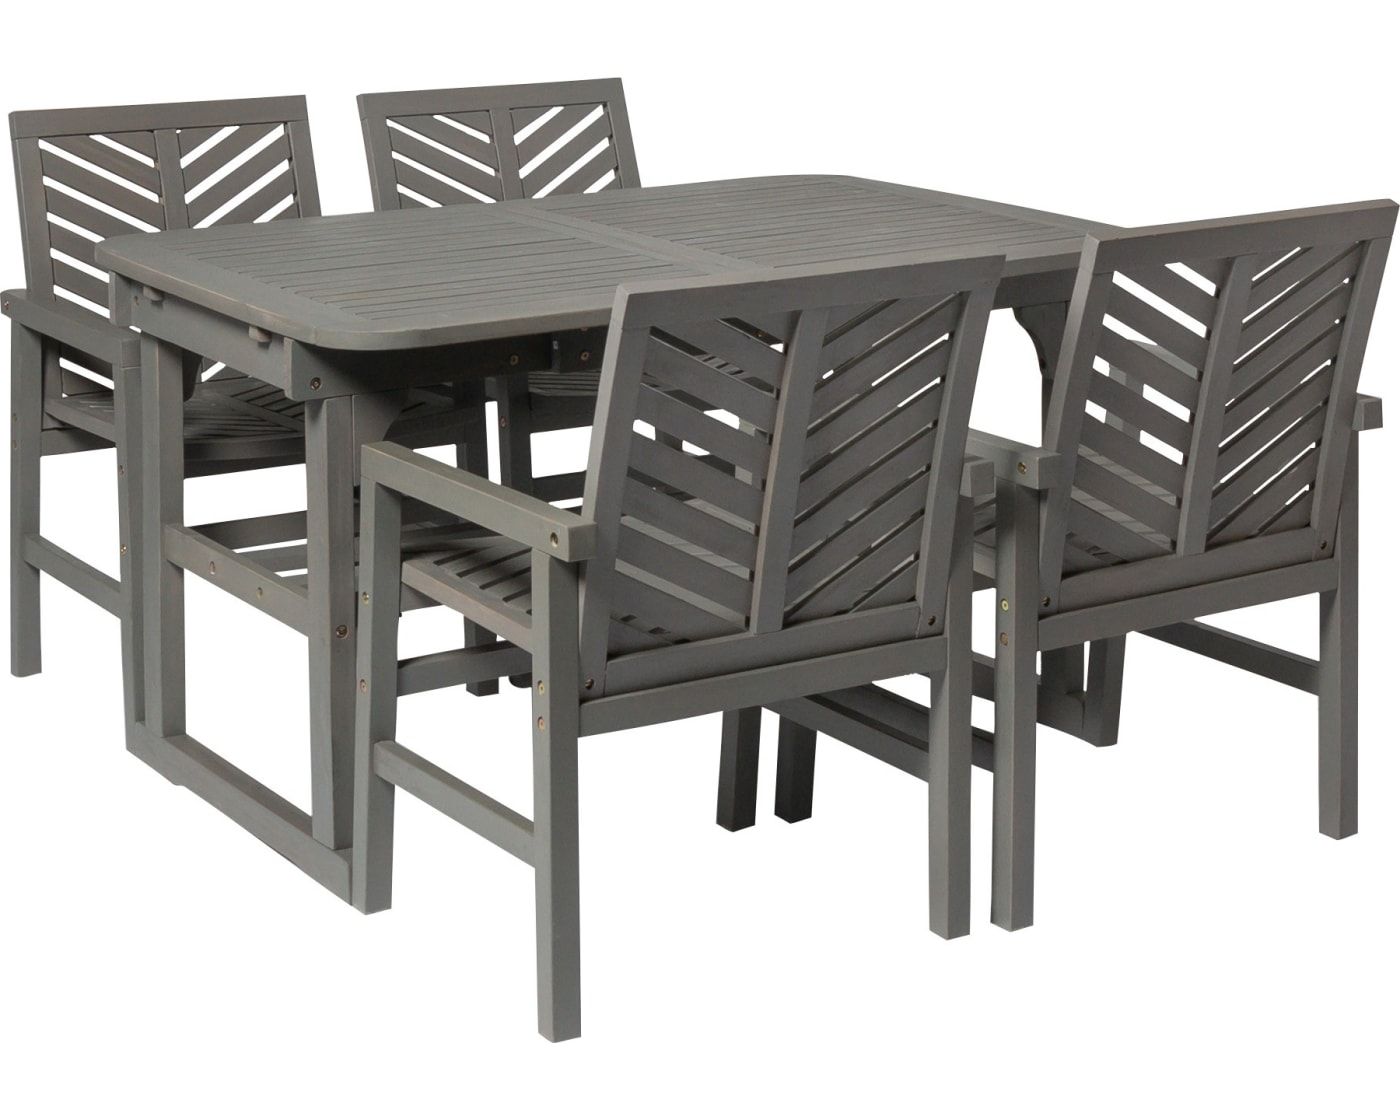 Gray Wash 5 Piece Extendable Outdoor Patio Dining Set Intended For Gray Extendable Patio Dining Sets (View 5 of 15)